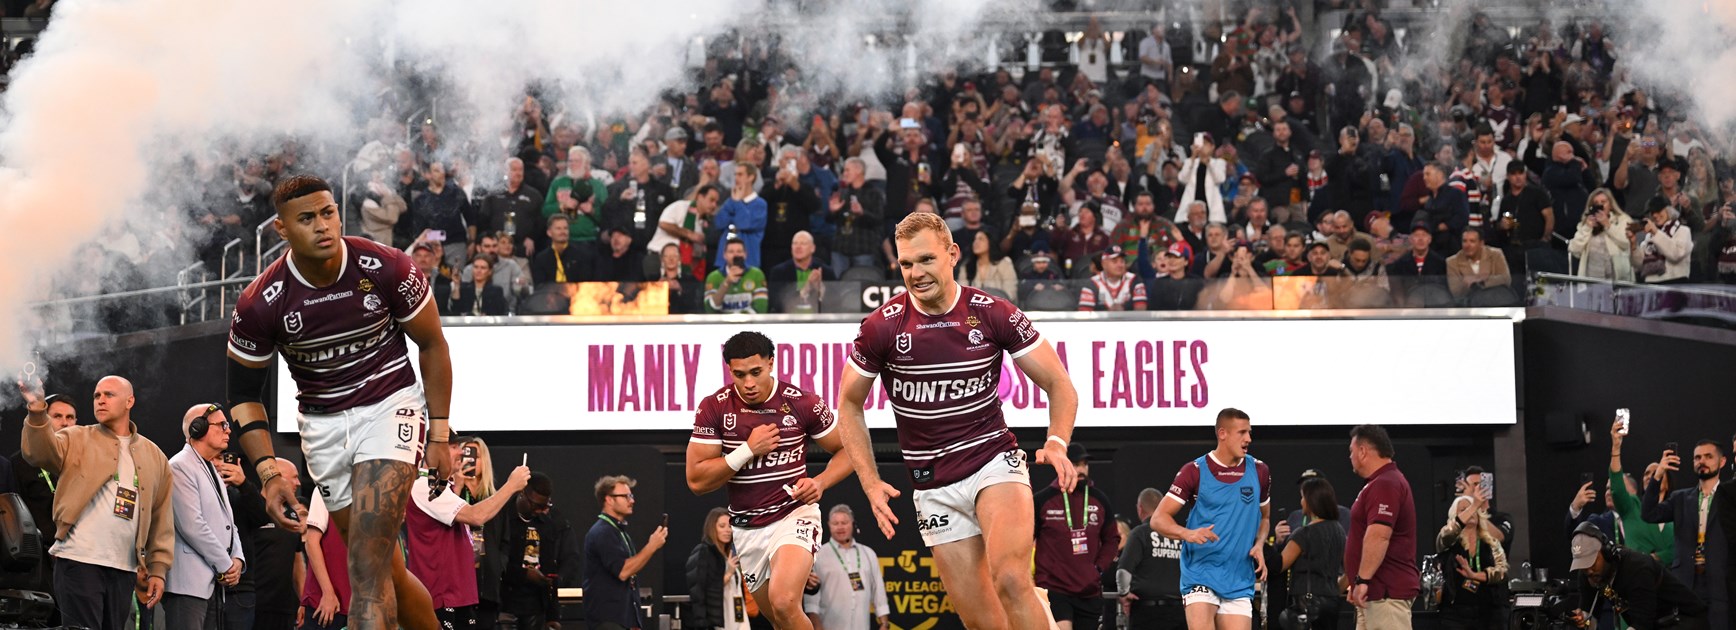 Scott Penn keen to build on American Eagles vision